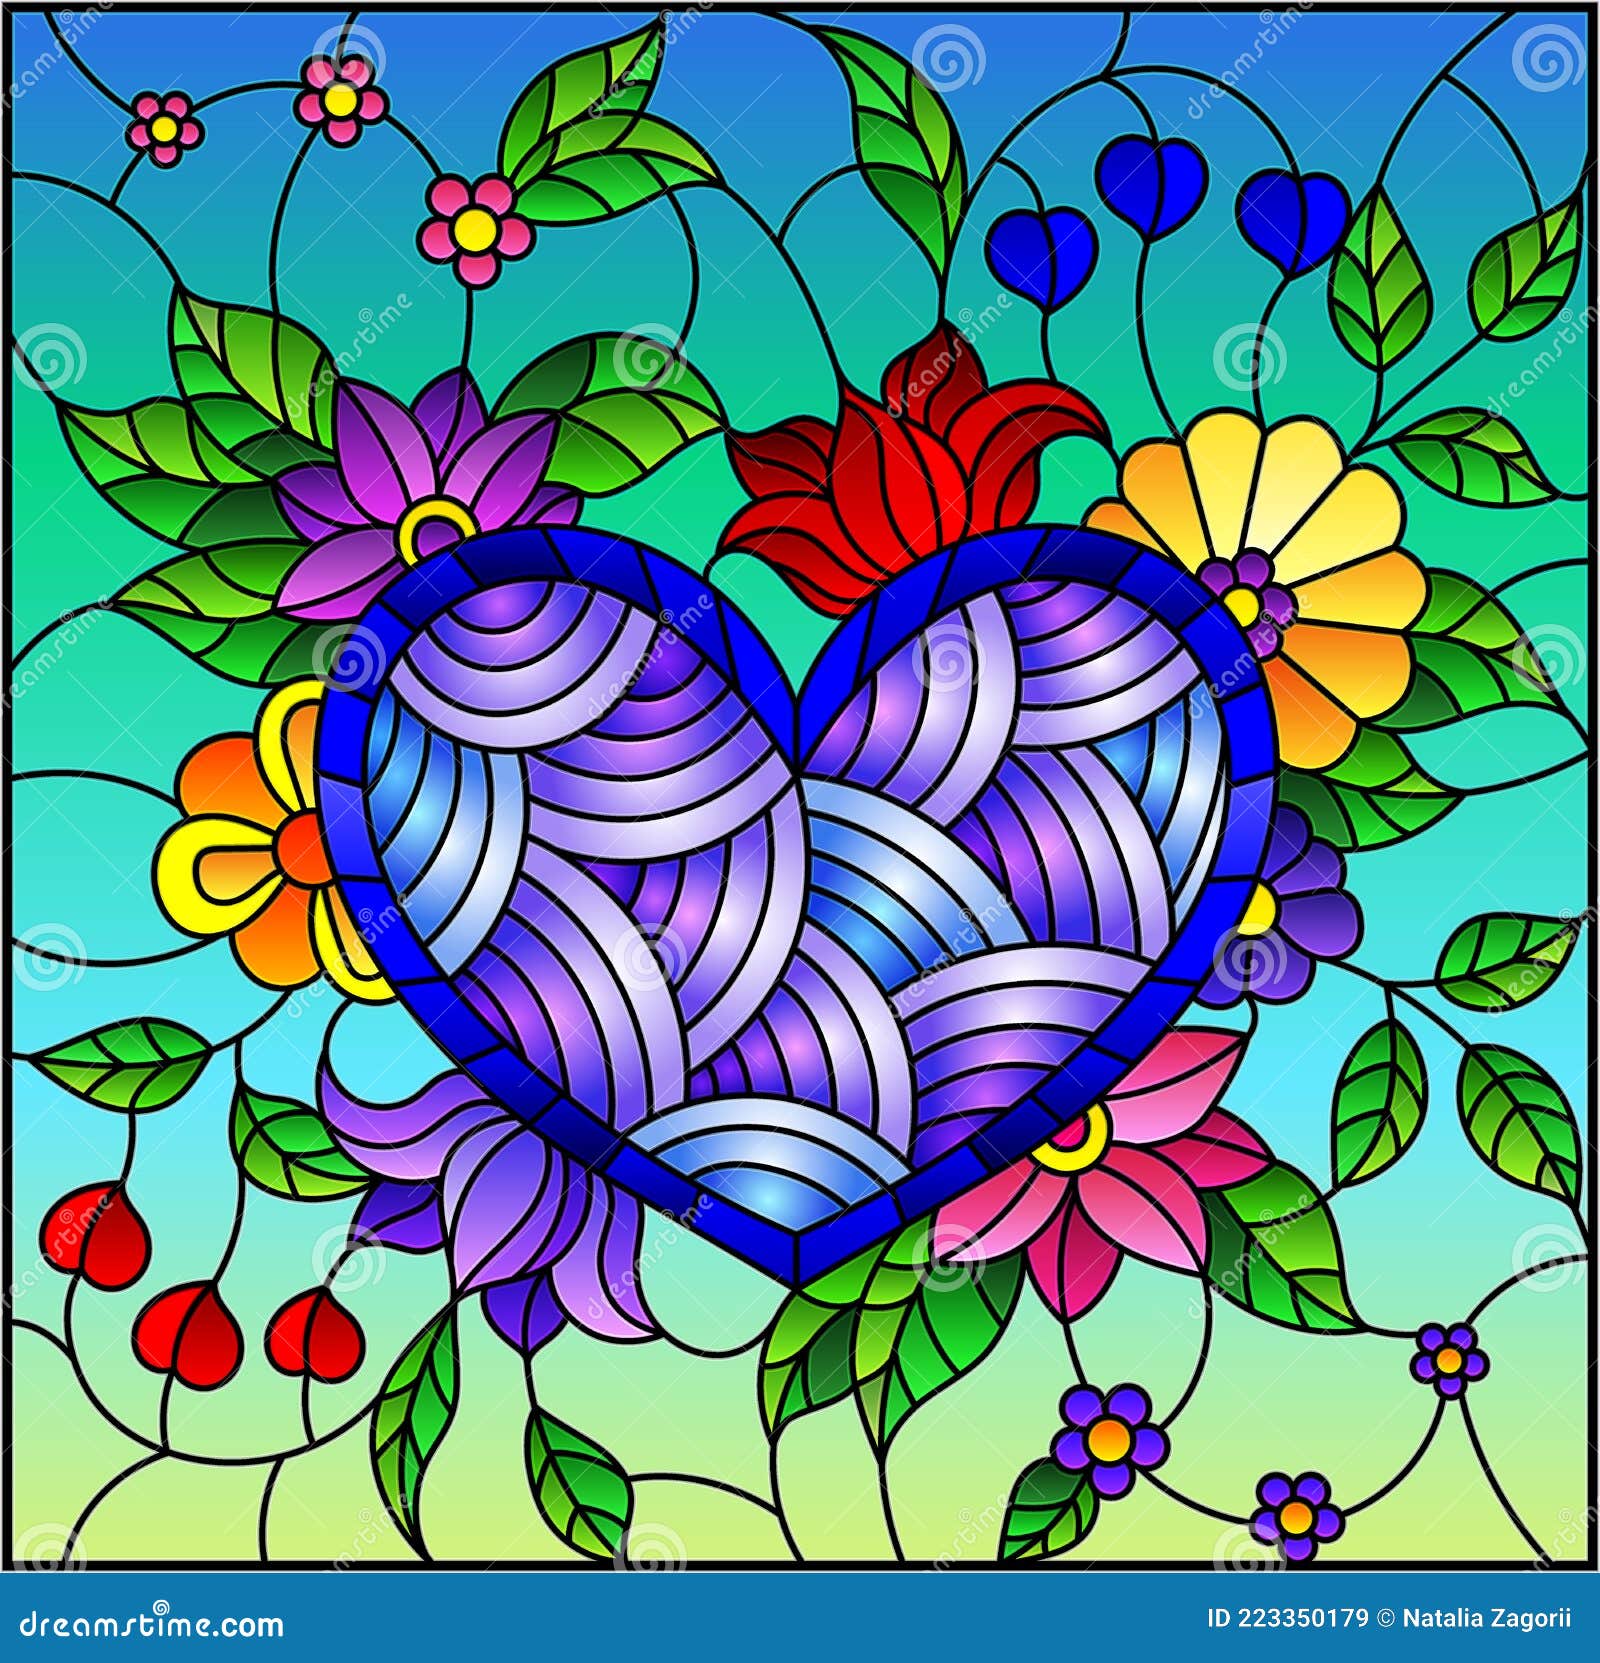 stained glass  with  a bright blue heart and flowers against the sky